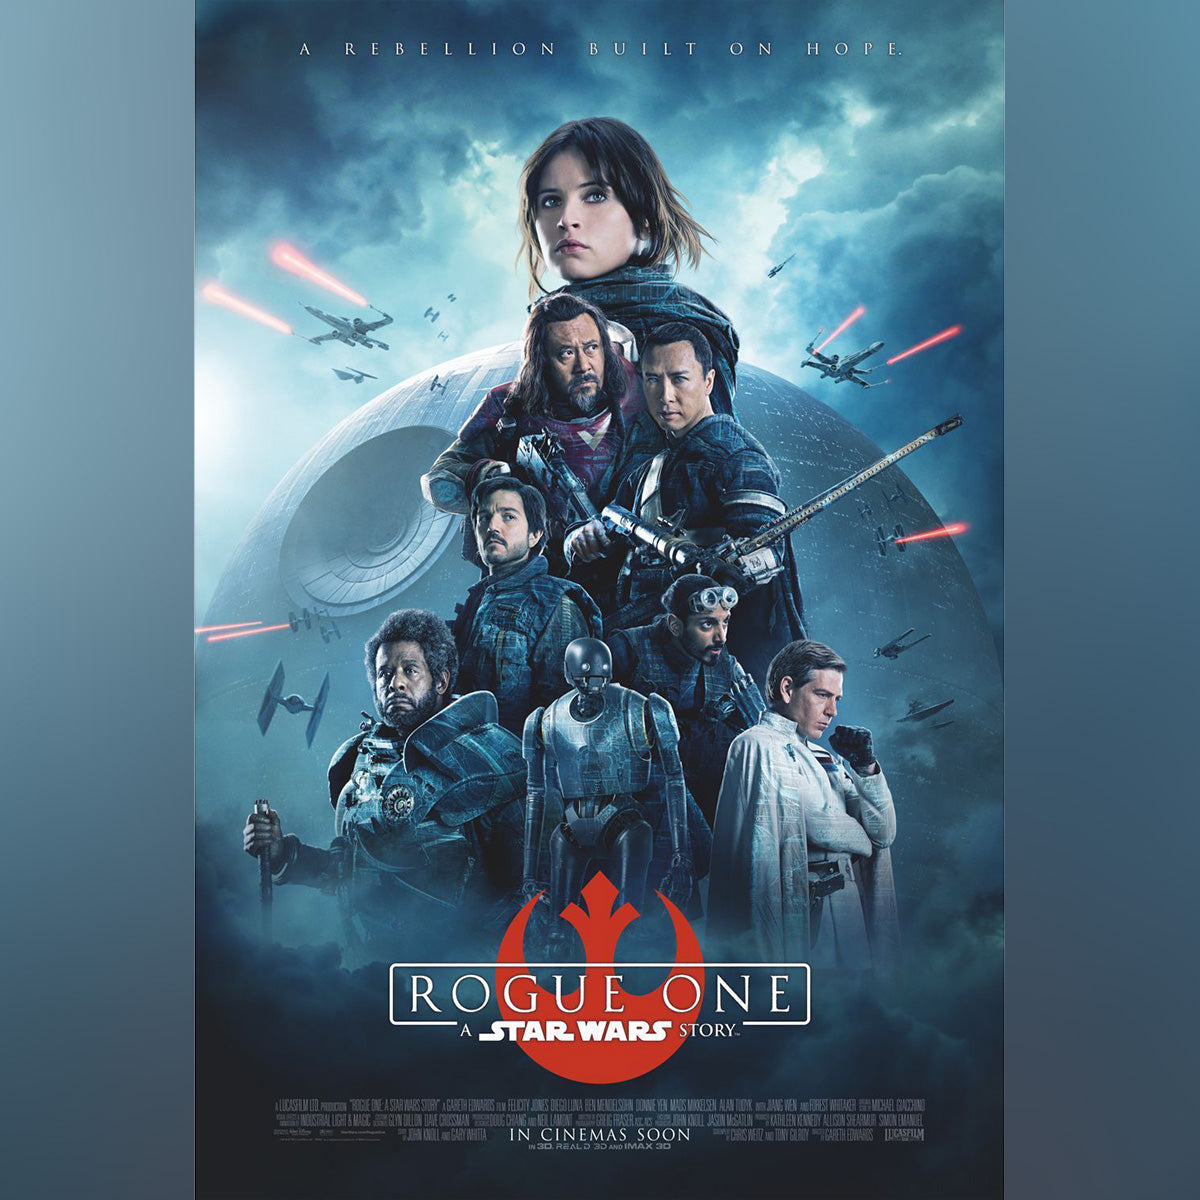 Original Movie Poster of Rogue One: A Star Wars Story (2016)